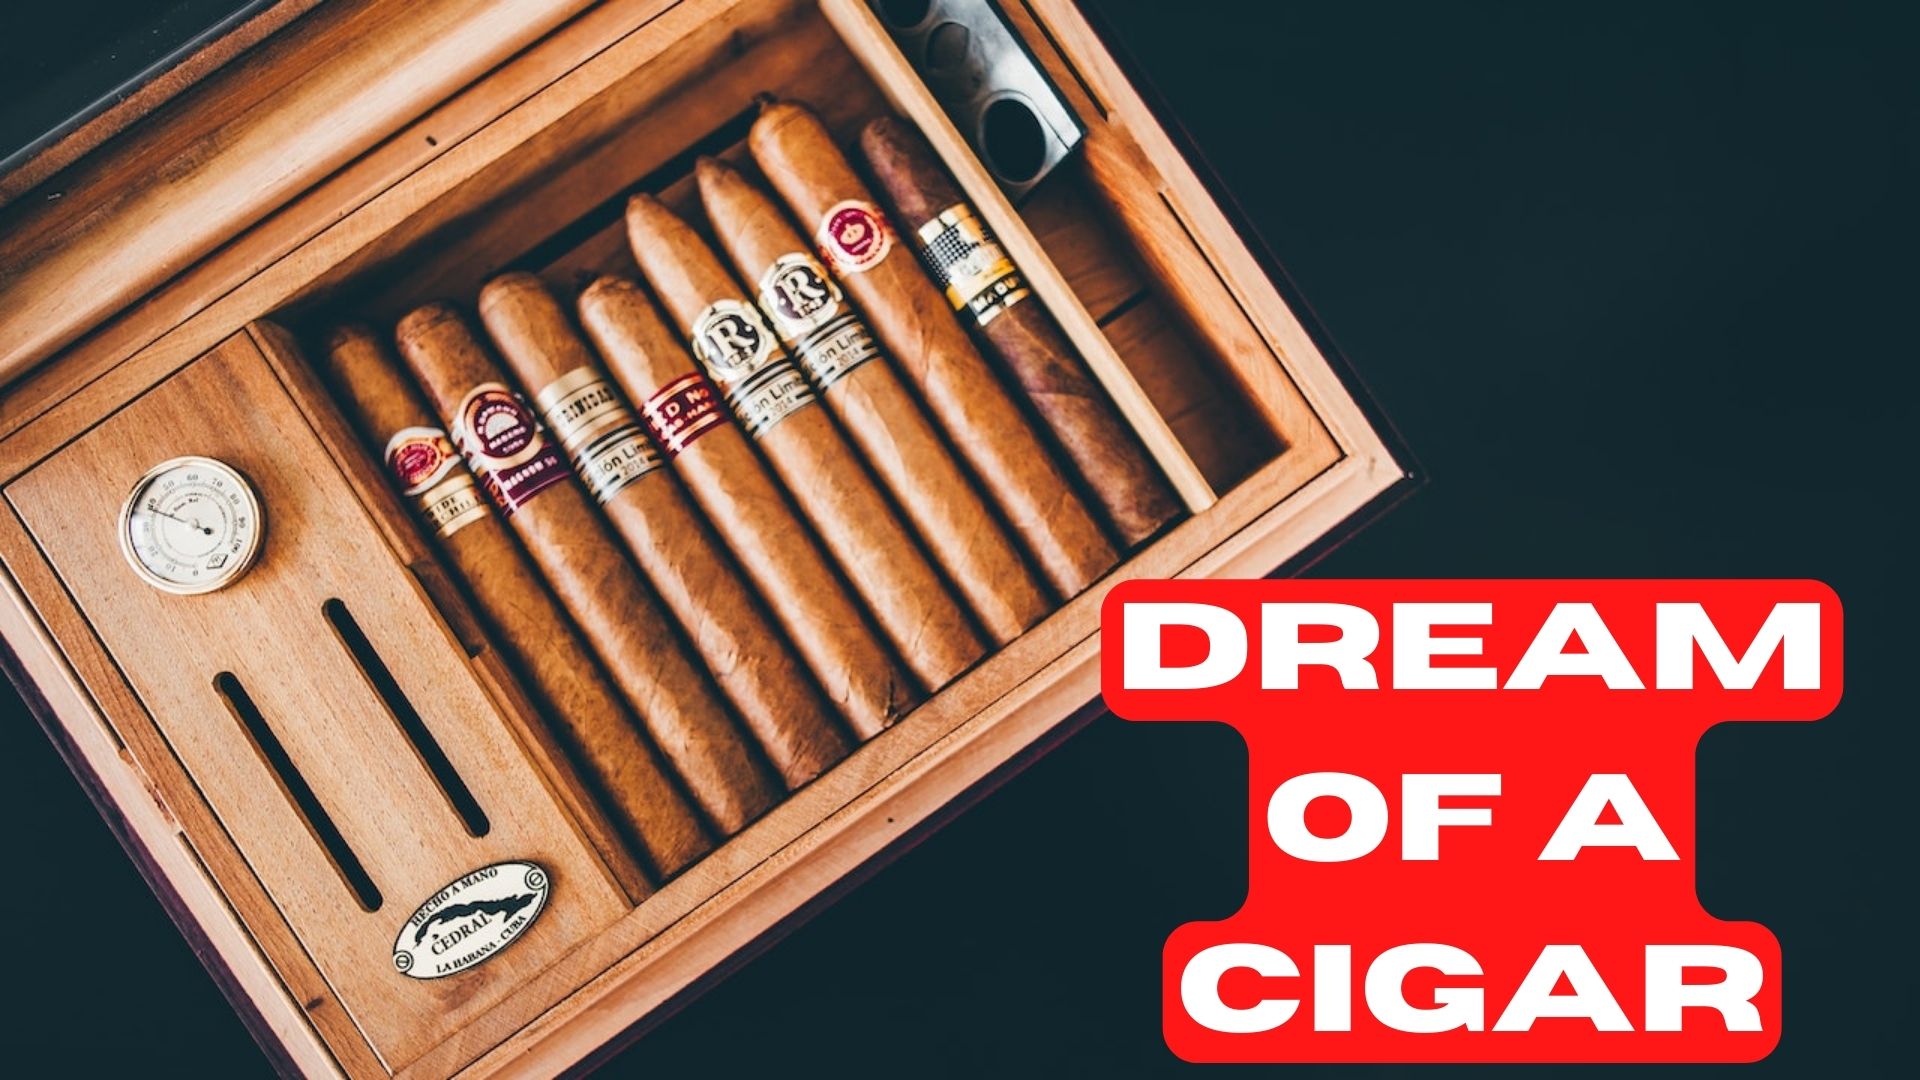 Dream Of A Cigar - Often Reflects Big Delusions